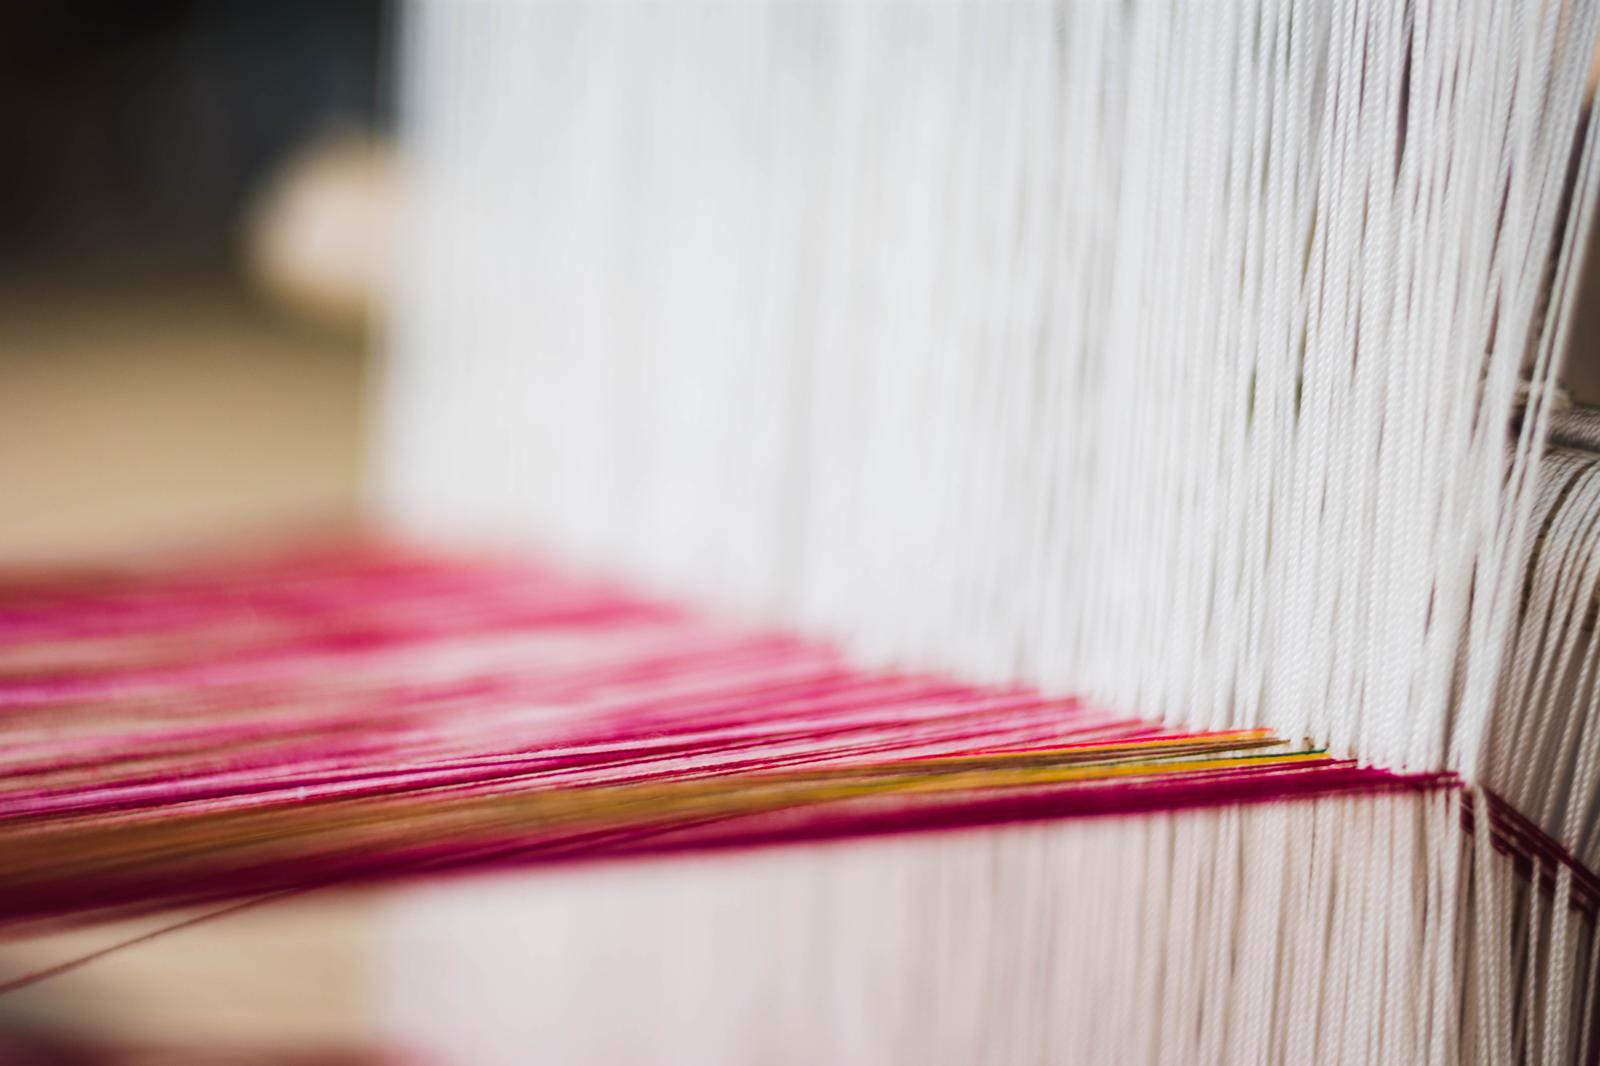 Weaving of textiles in Muhu vald